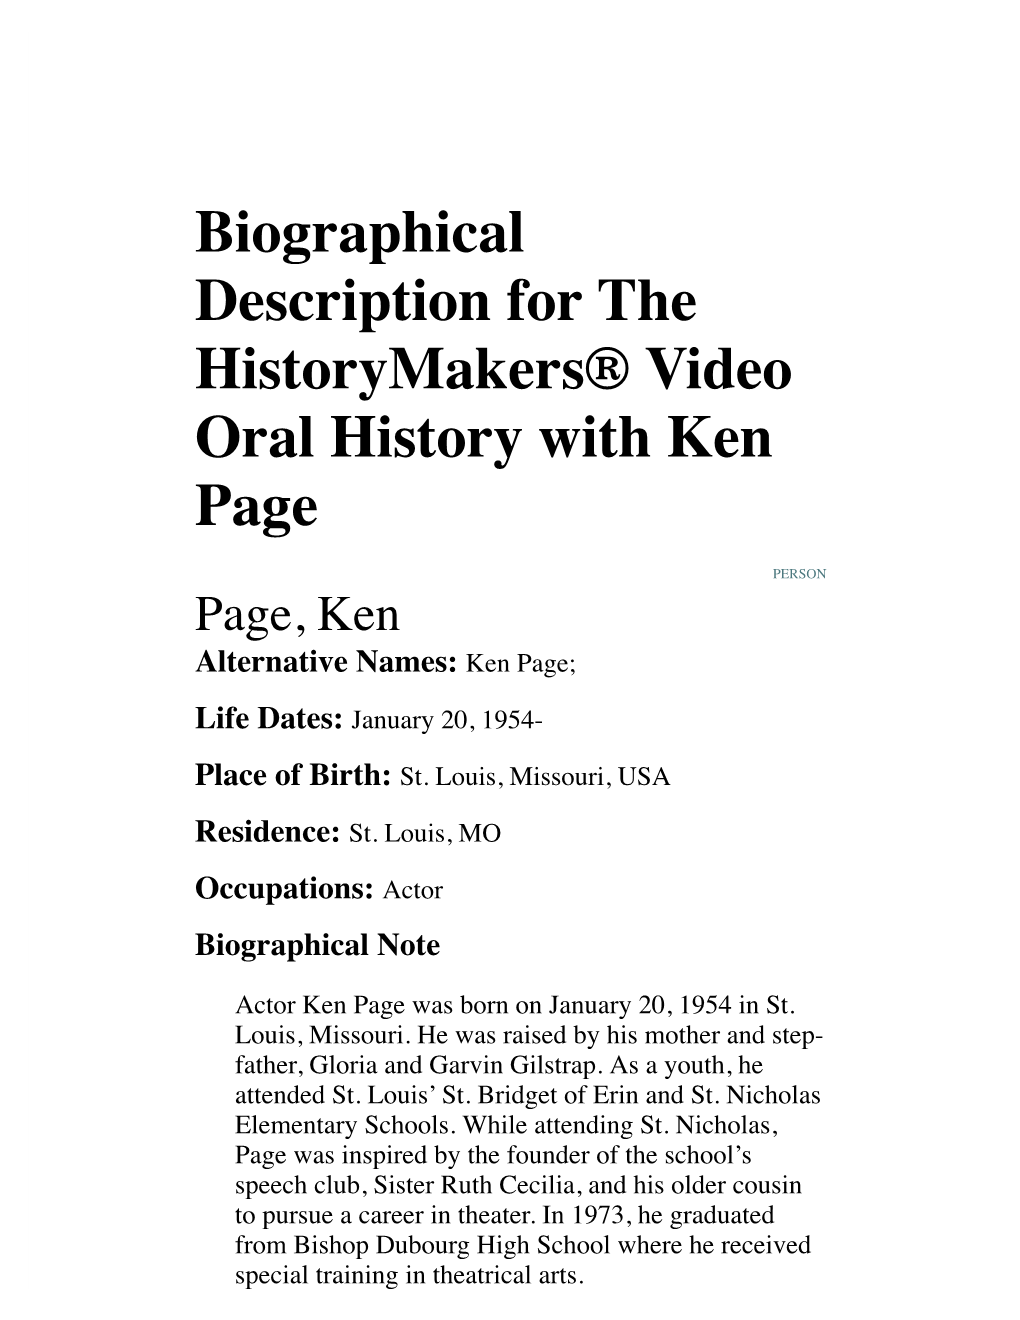 Biographical Description for the Historymakers® Video Oral History with Ken Page